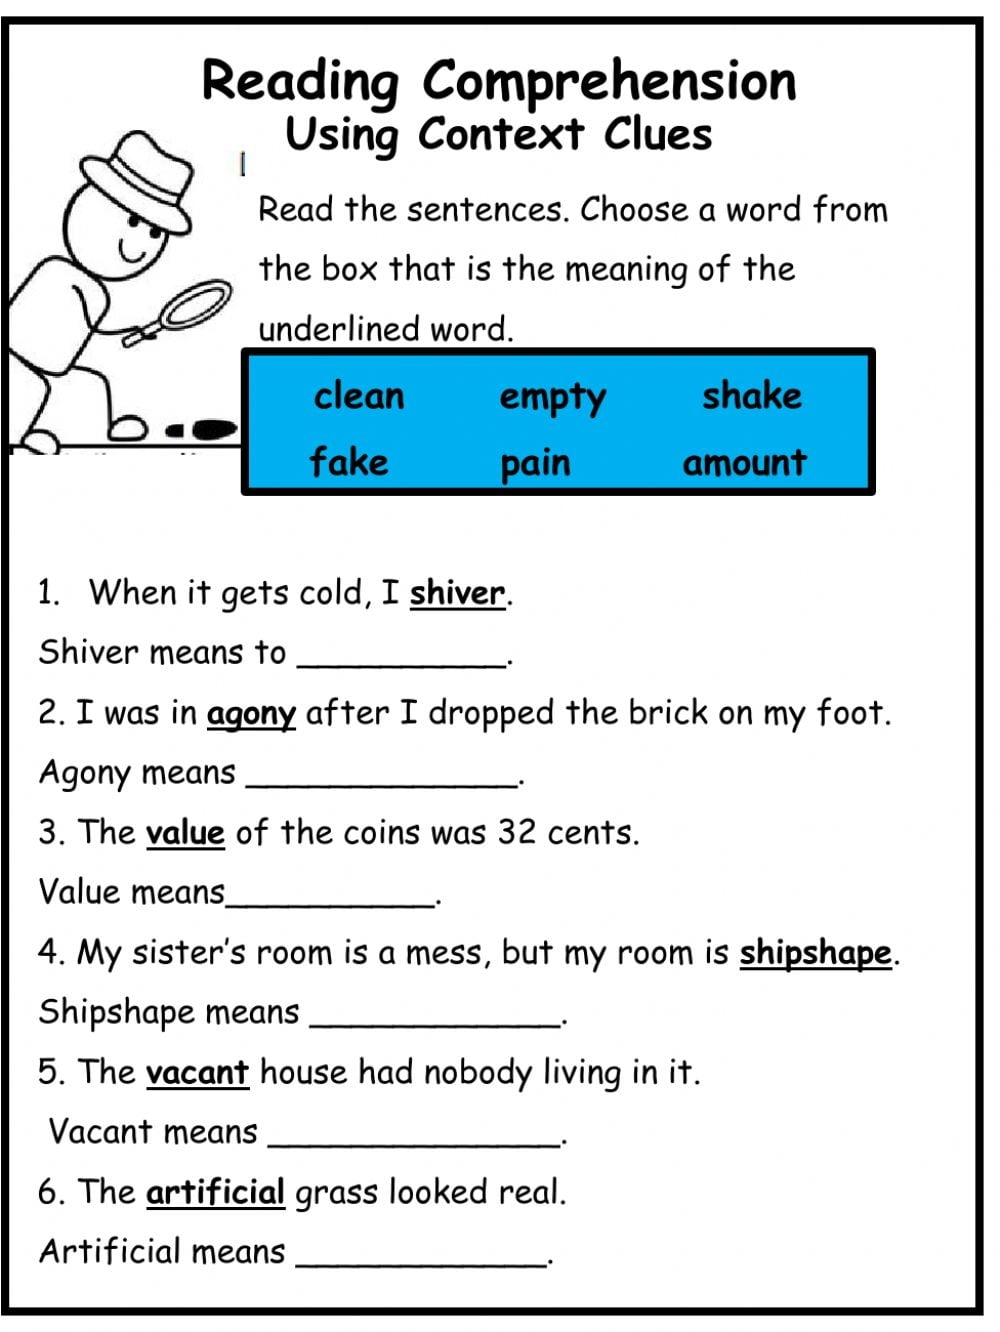 Context Clues Reading Comprehension Worksheets